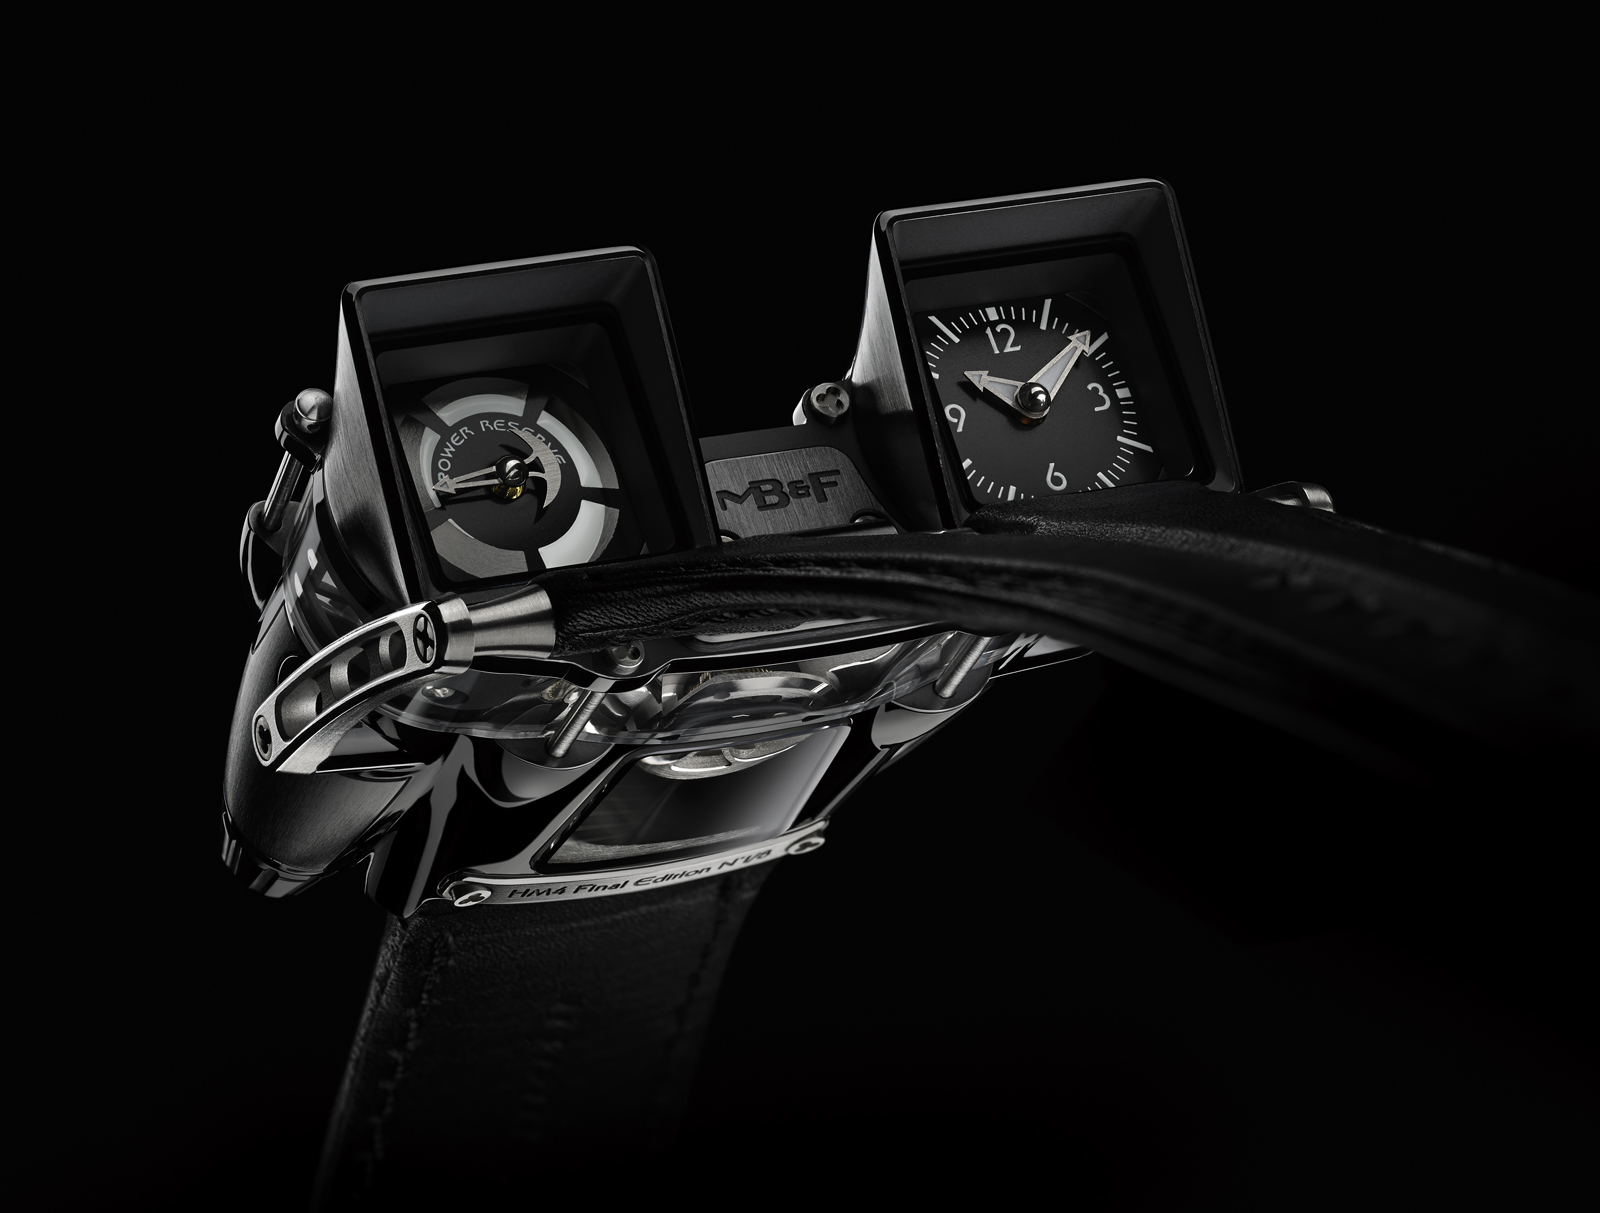 MB&F HM4 Final Edition